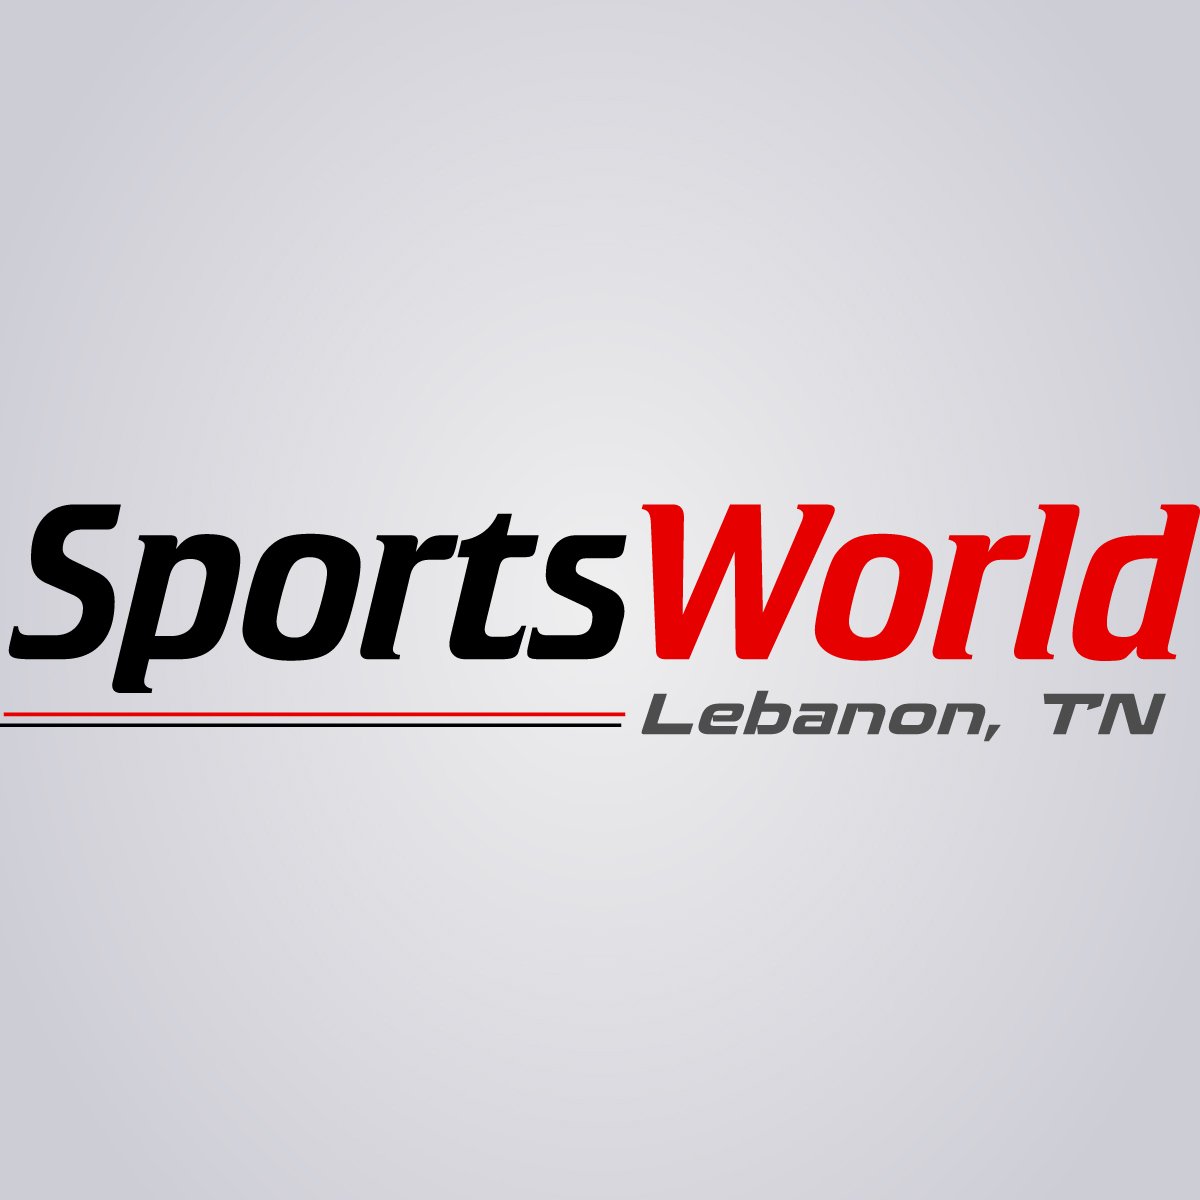 Sports World has been a symbol of sports in the Lebanon community for over 20 years. We pride ourselves on customer service and reliability.